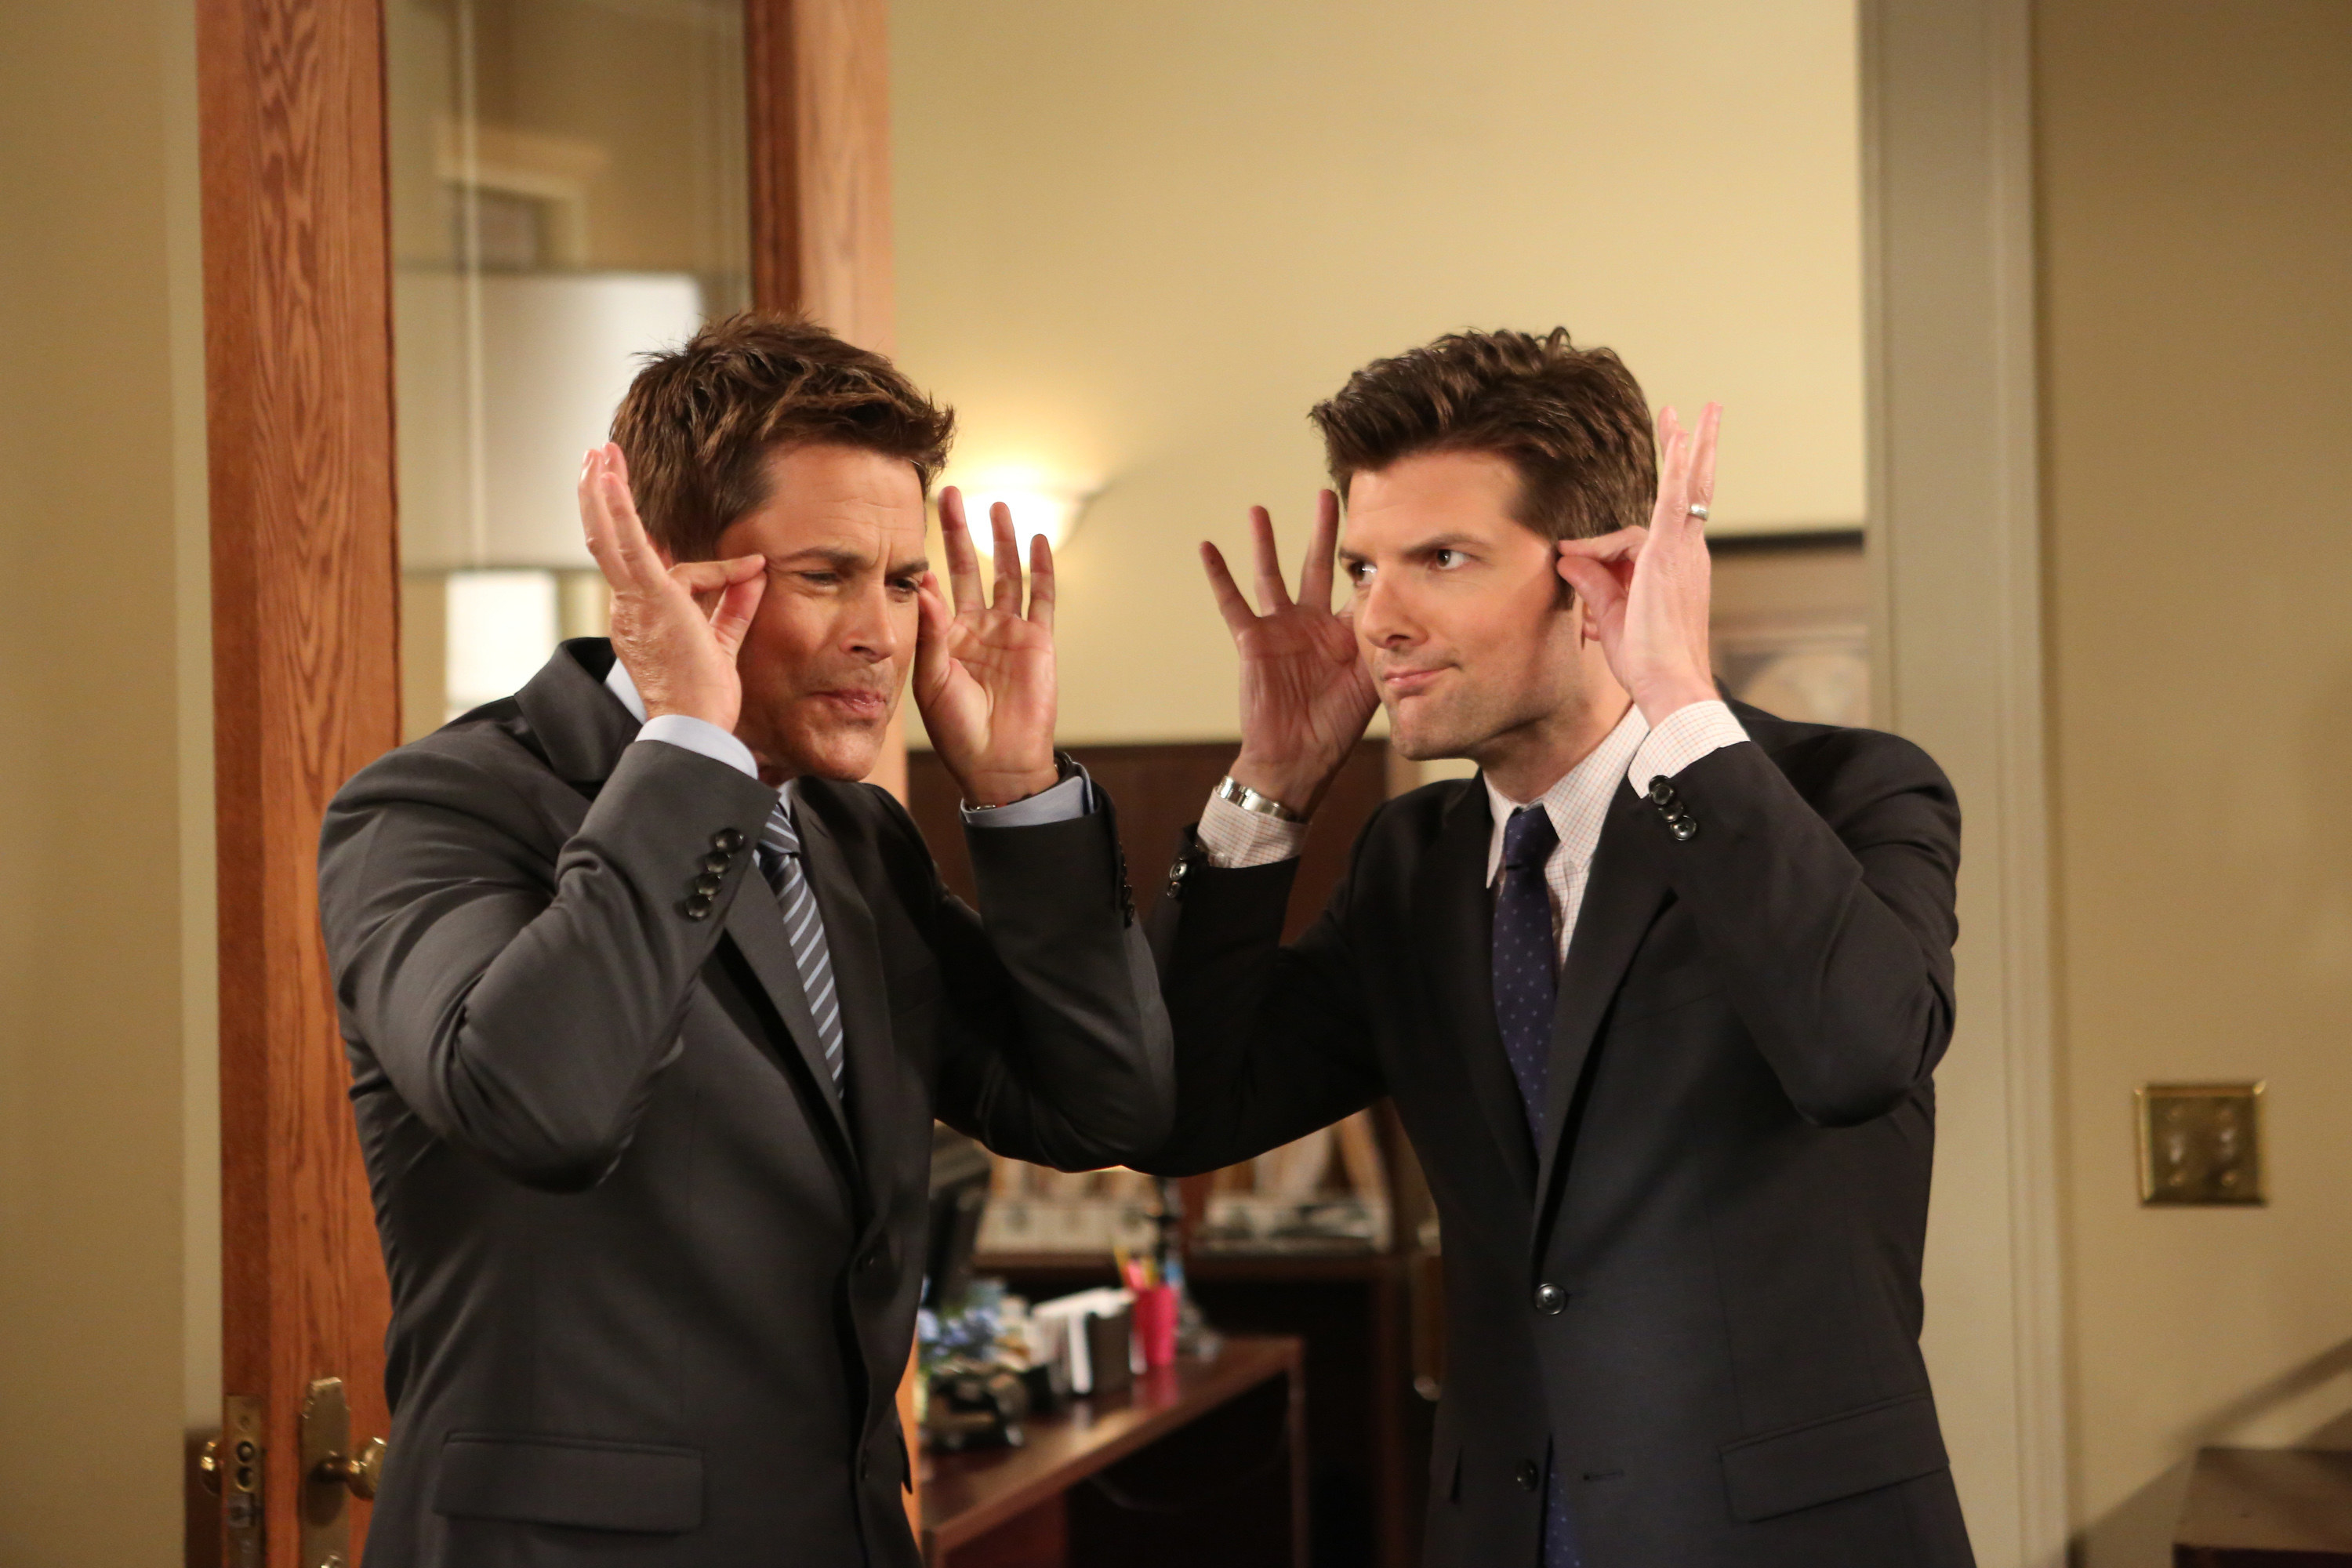 Chris and Ben putting on imaginary glasses